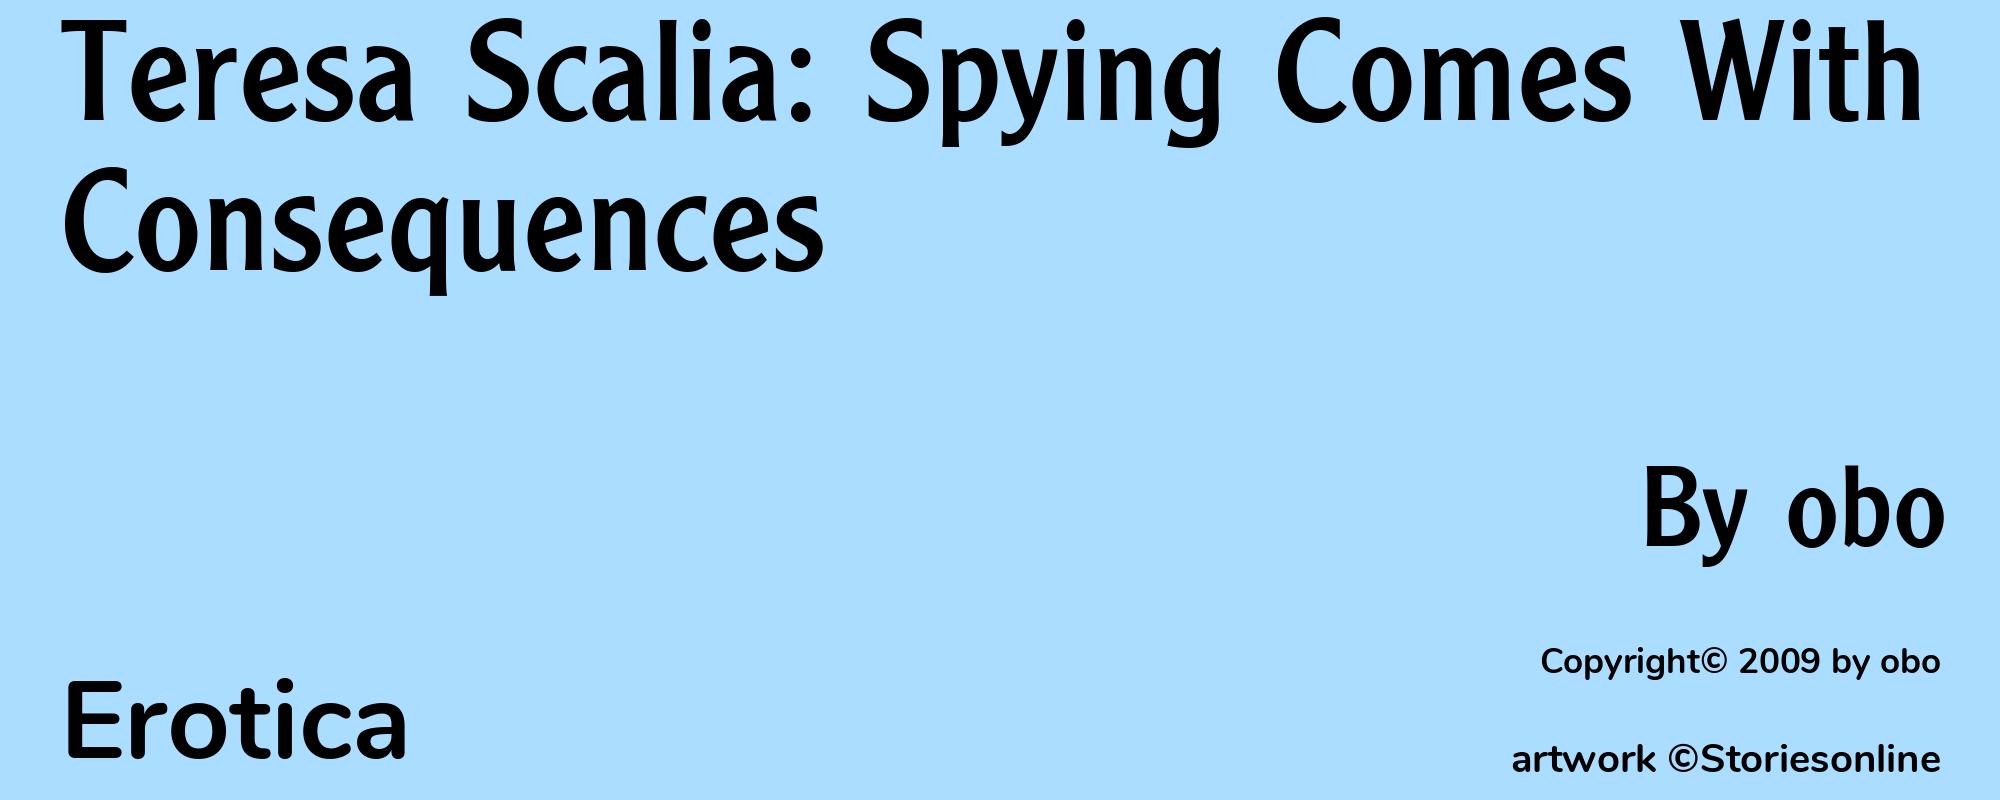 Teresa Scalia: Spying Comes With Consequences - Cover